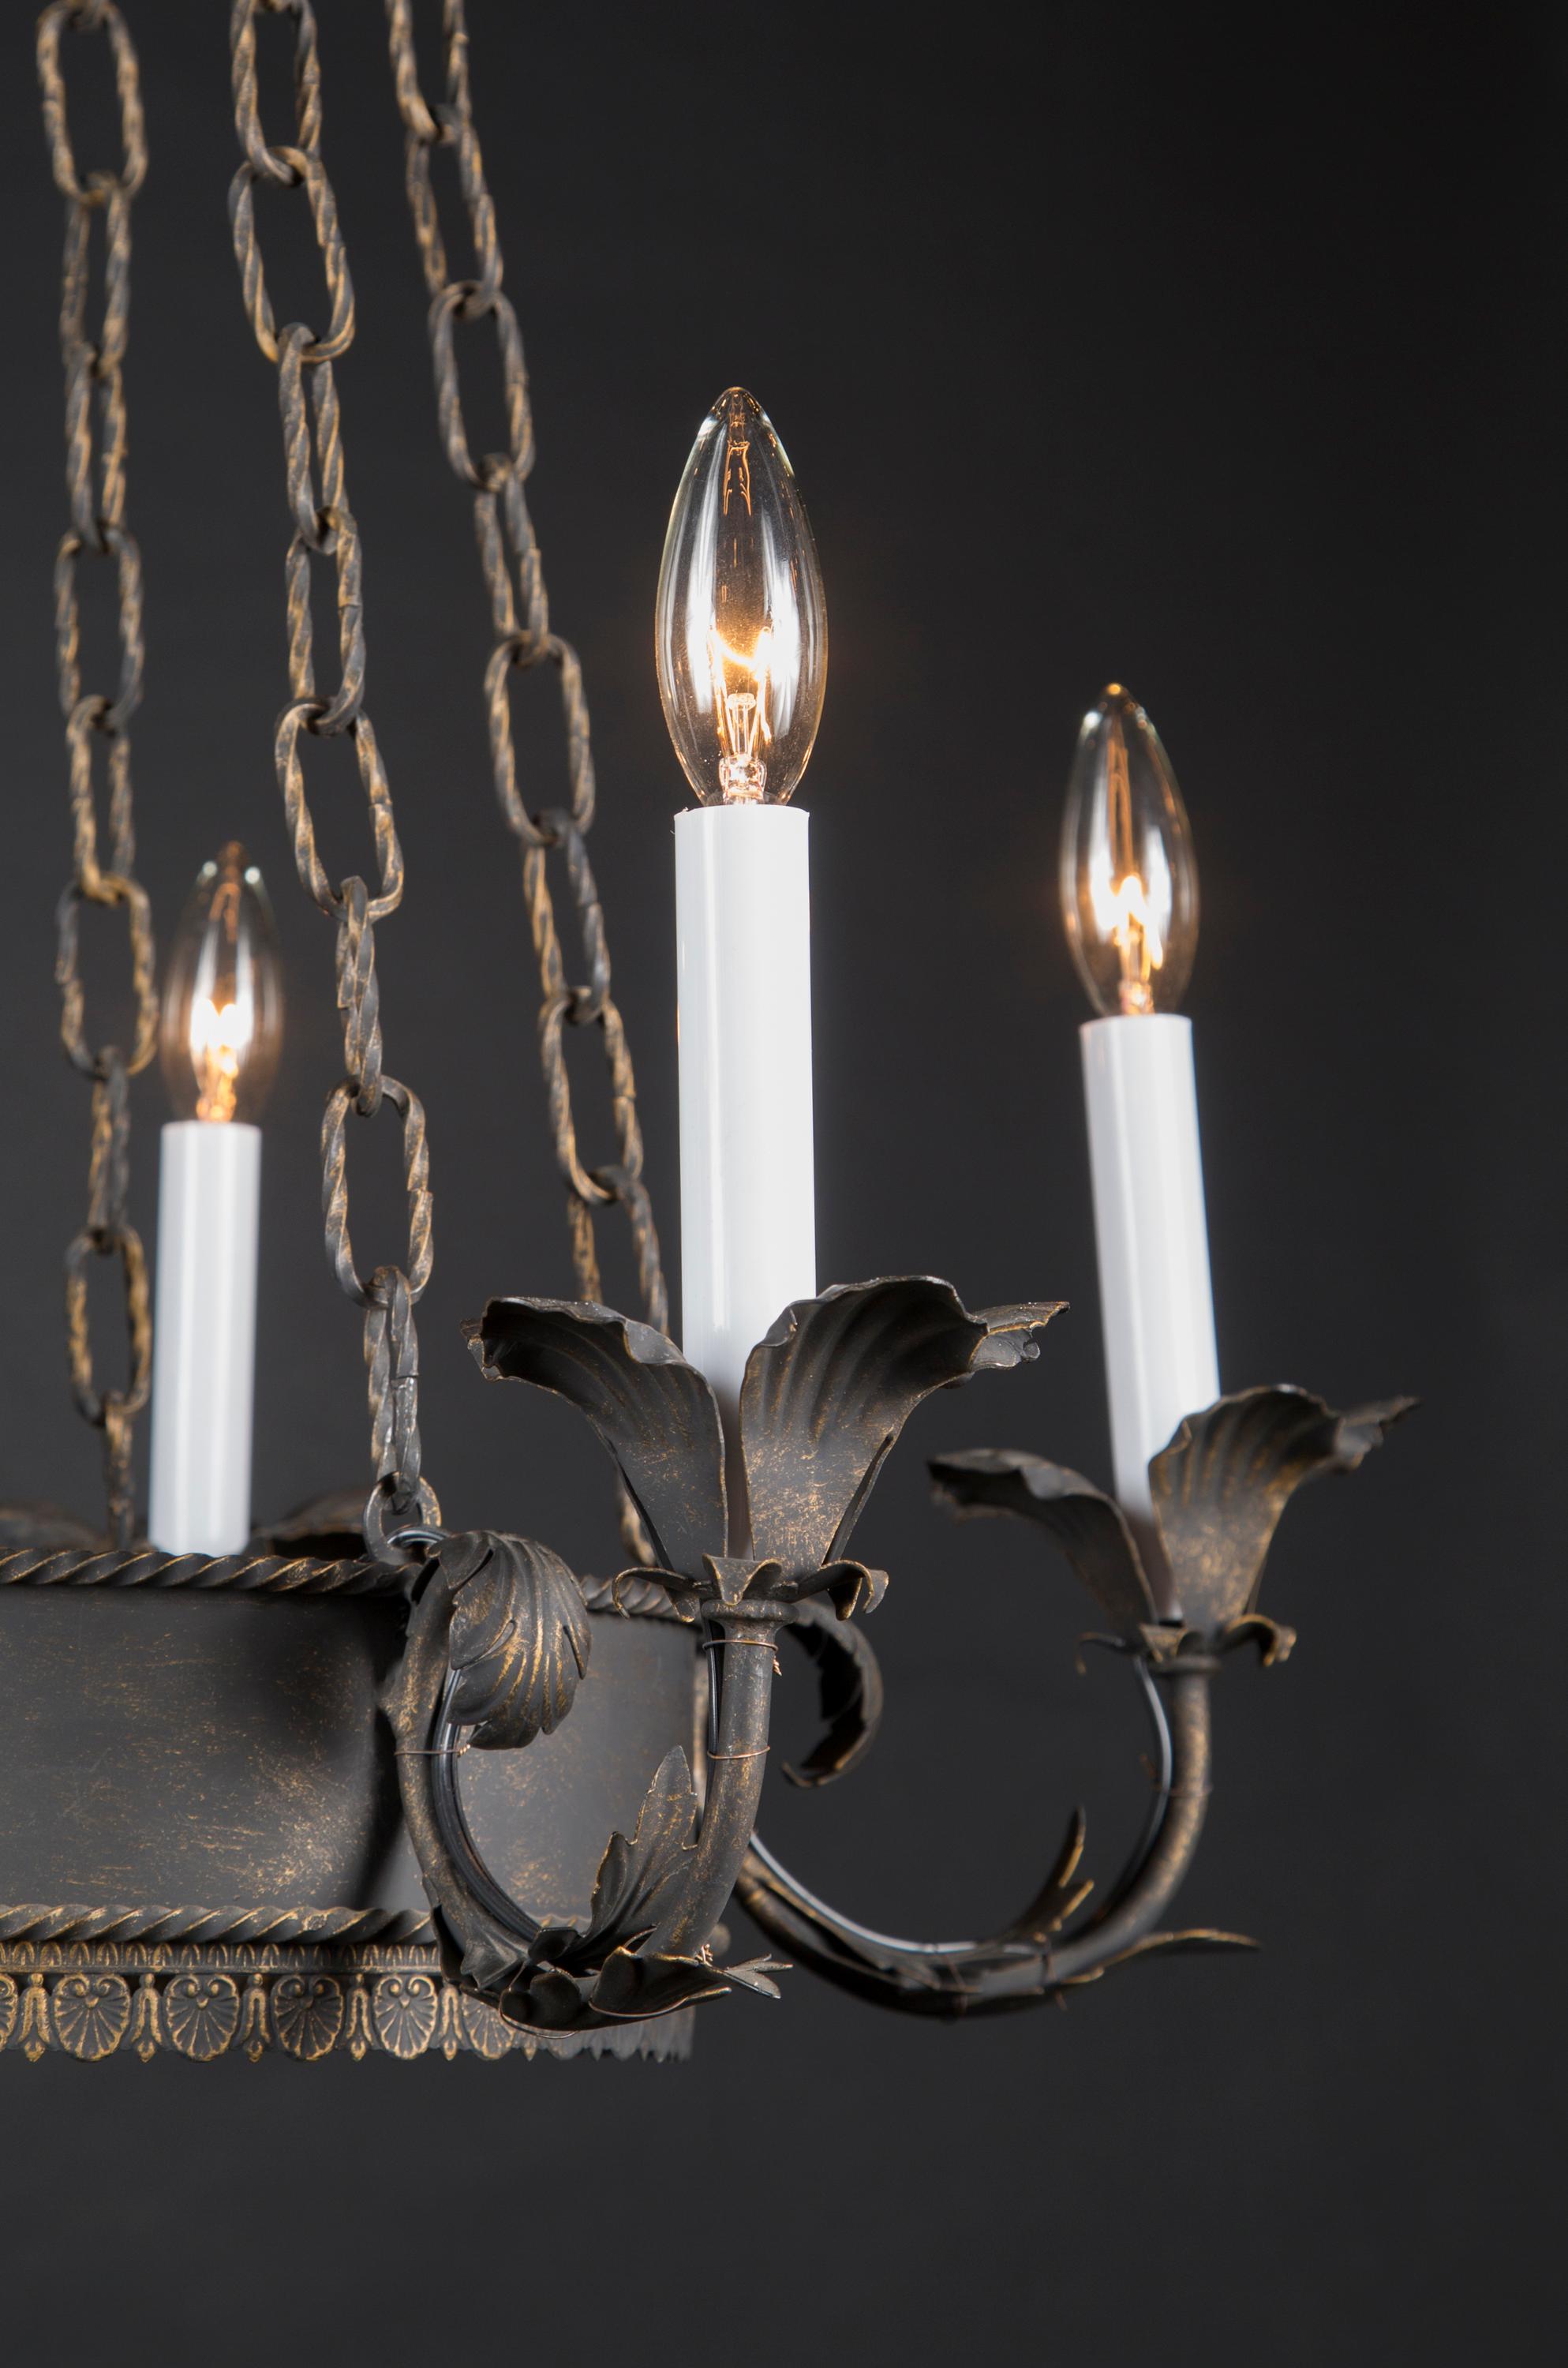 This French Empire tole and iron chandelier is painted black with a beautiful patina. The piece dates back to the late 19th century and offers a combination of simplicity and details; note the five strands of spiraling chain that are mirrored in the